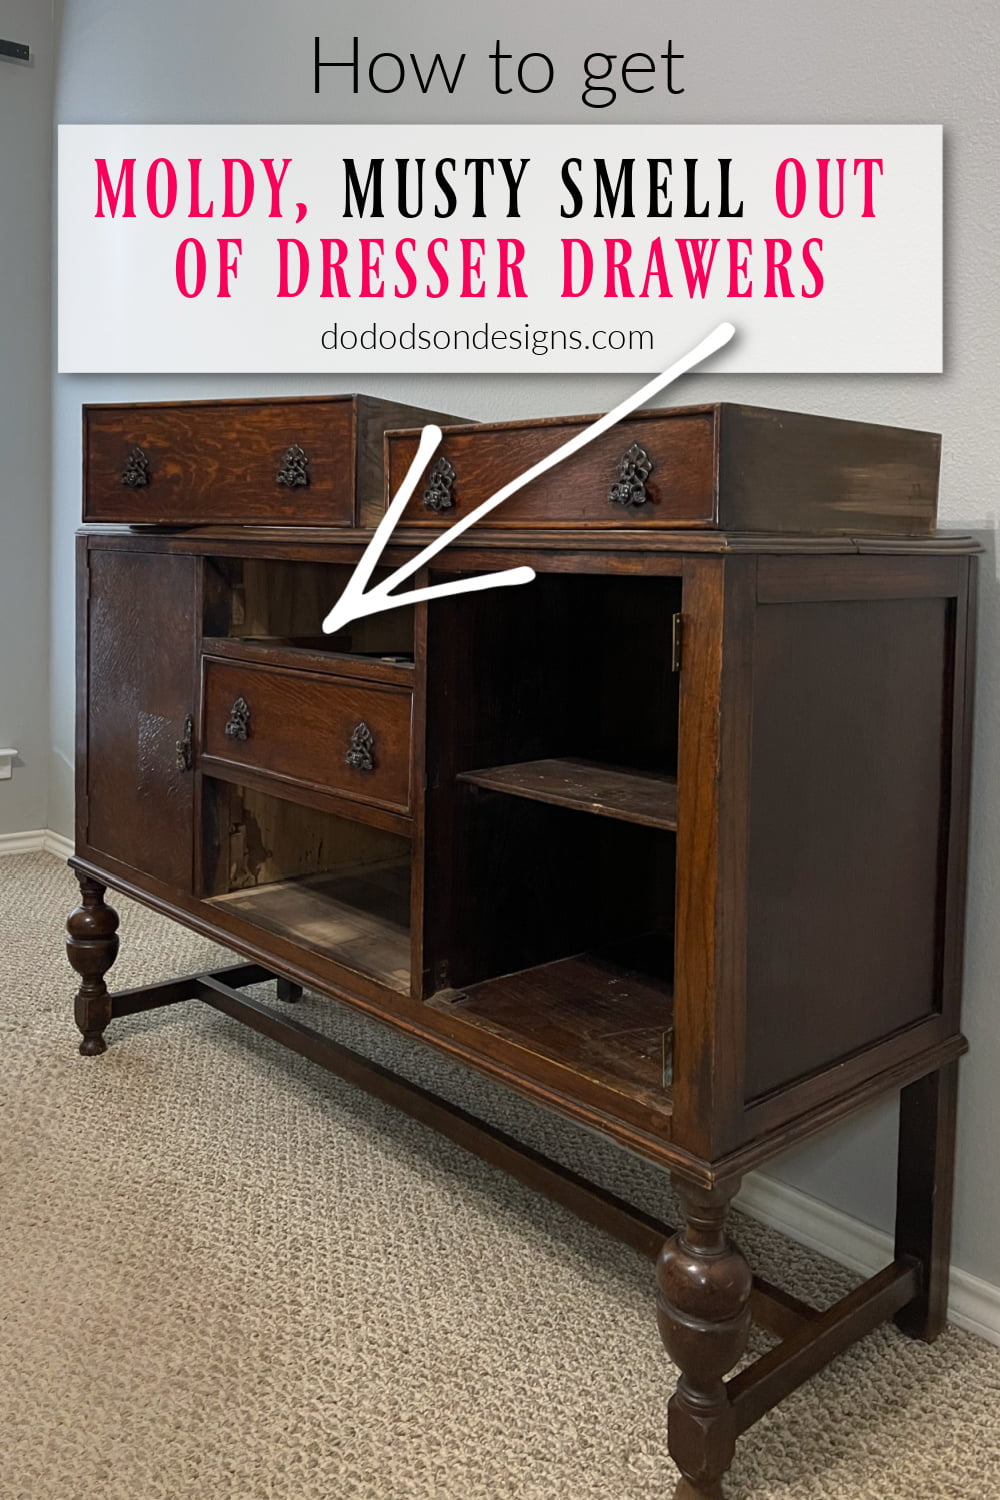 How To Get That Moldy Musty Smell Out, How To Clean Dresser Drawers From Smell